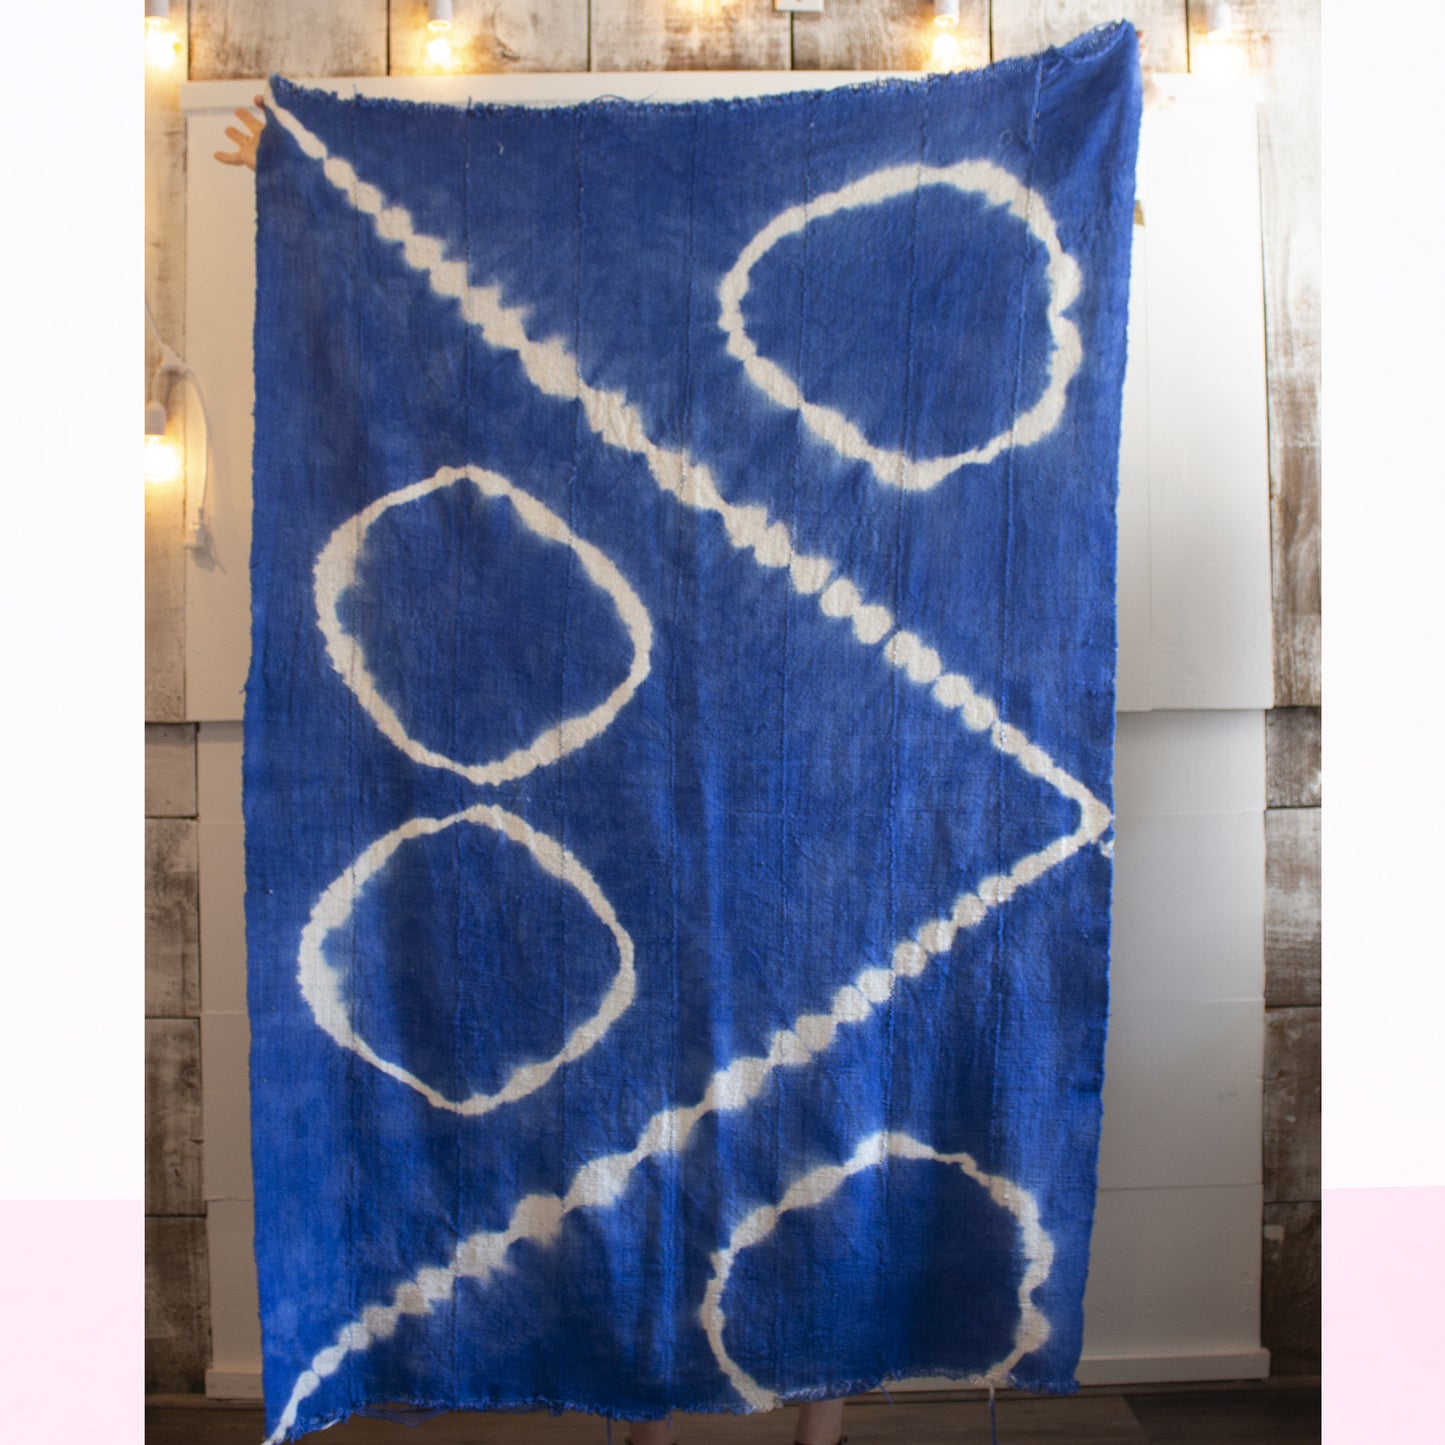 Vintage Blankets - Bright Dyed Cotton